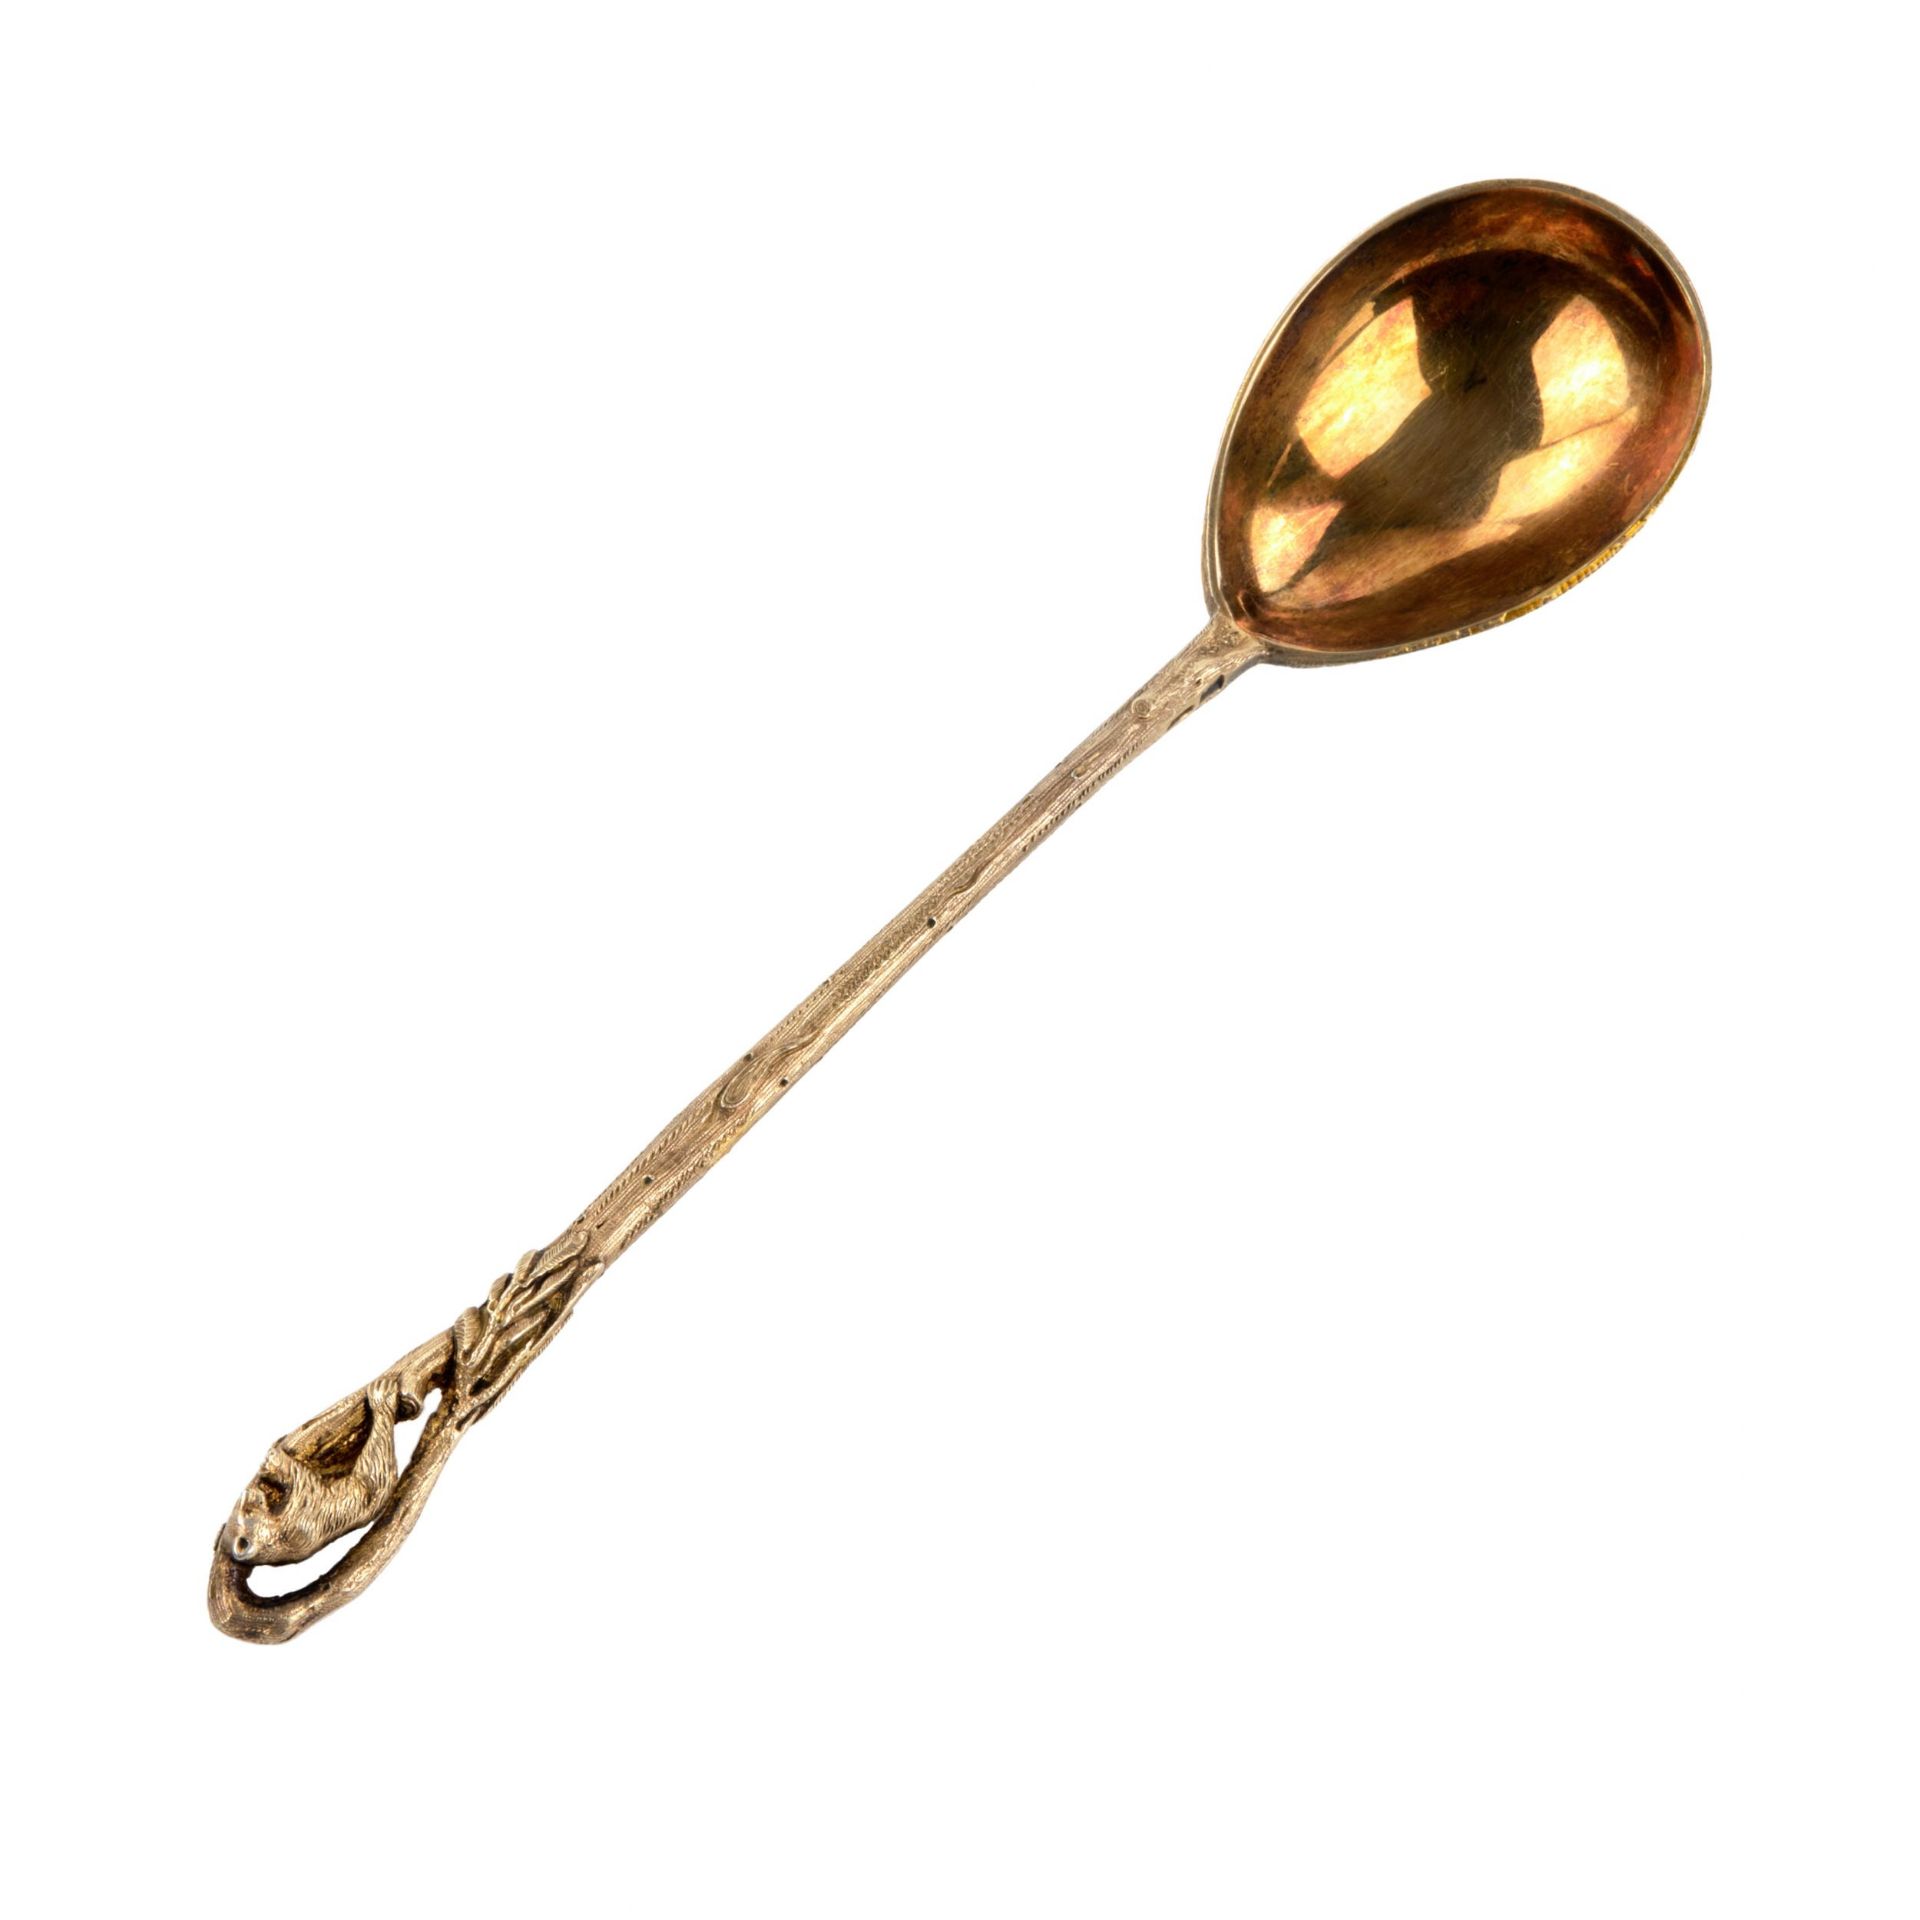 Russian silver spoon with a painted troika. V.I. Kangin. St. Petersburg 1899-1908. - Image 2 of 6